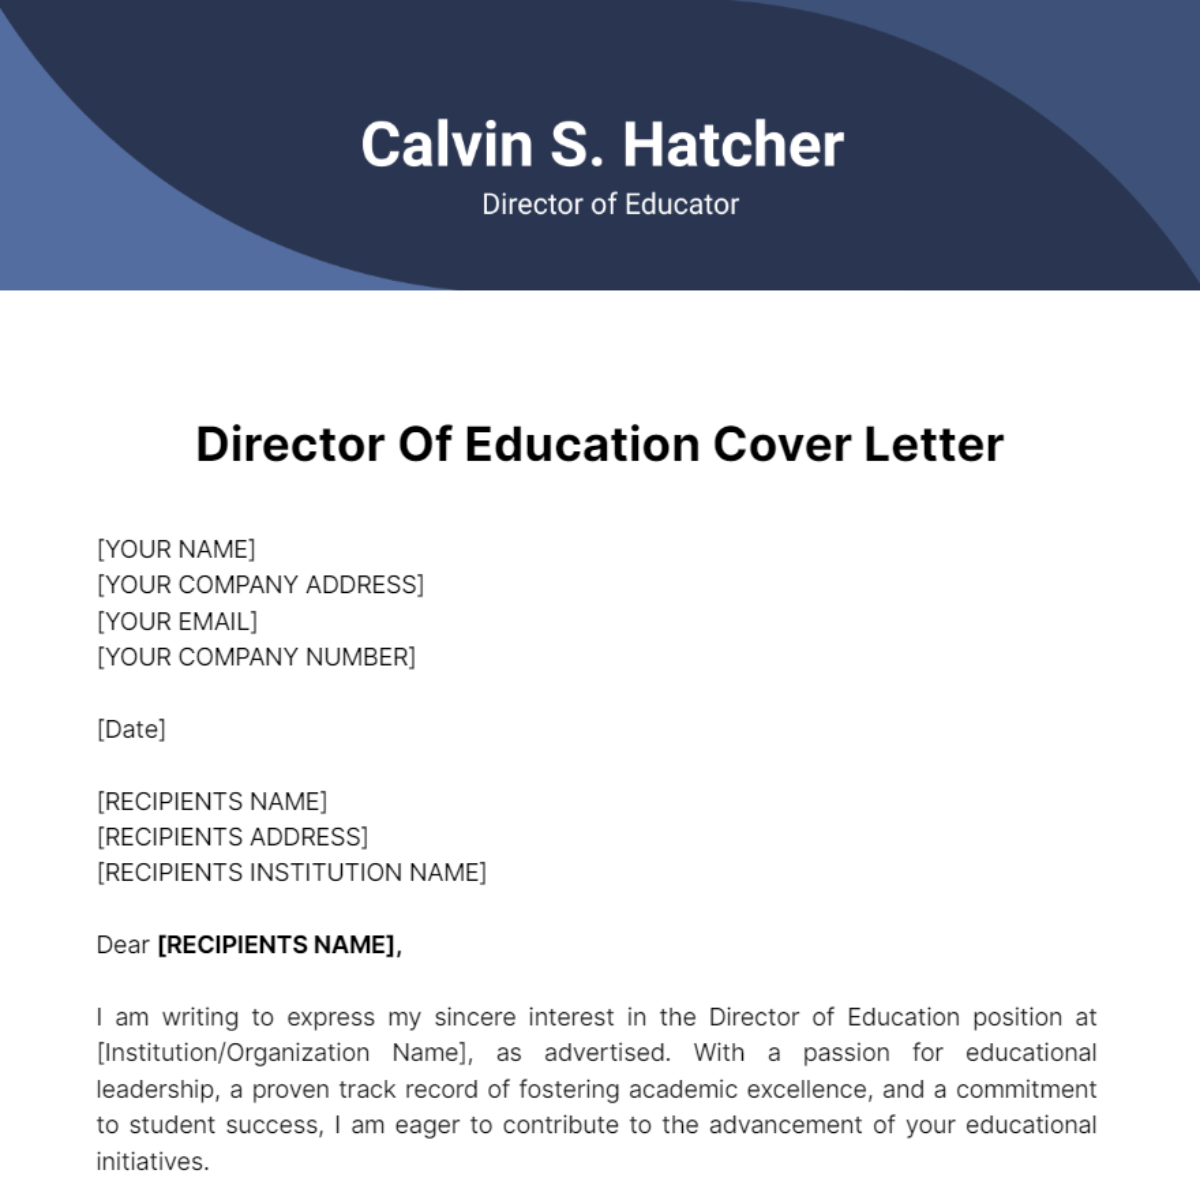 Director Of Education Cover Letter Template